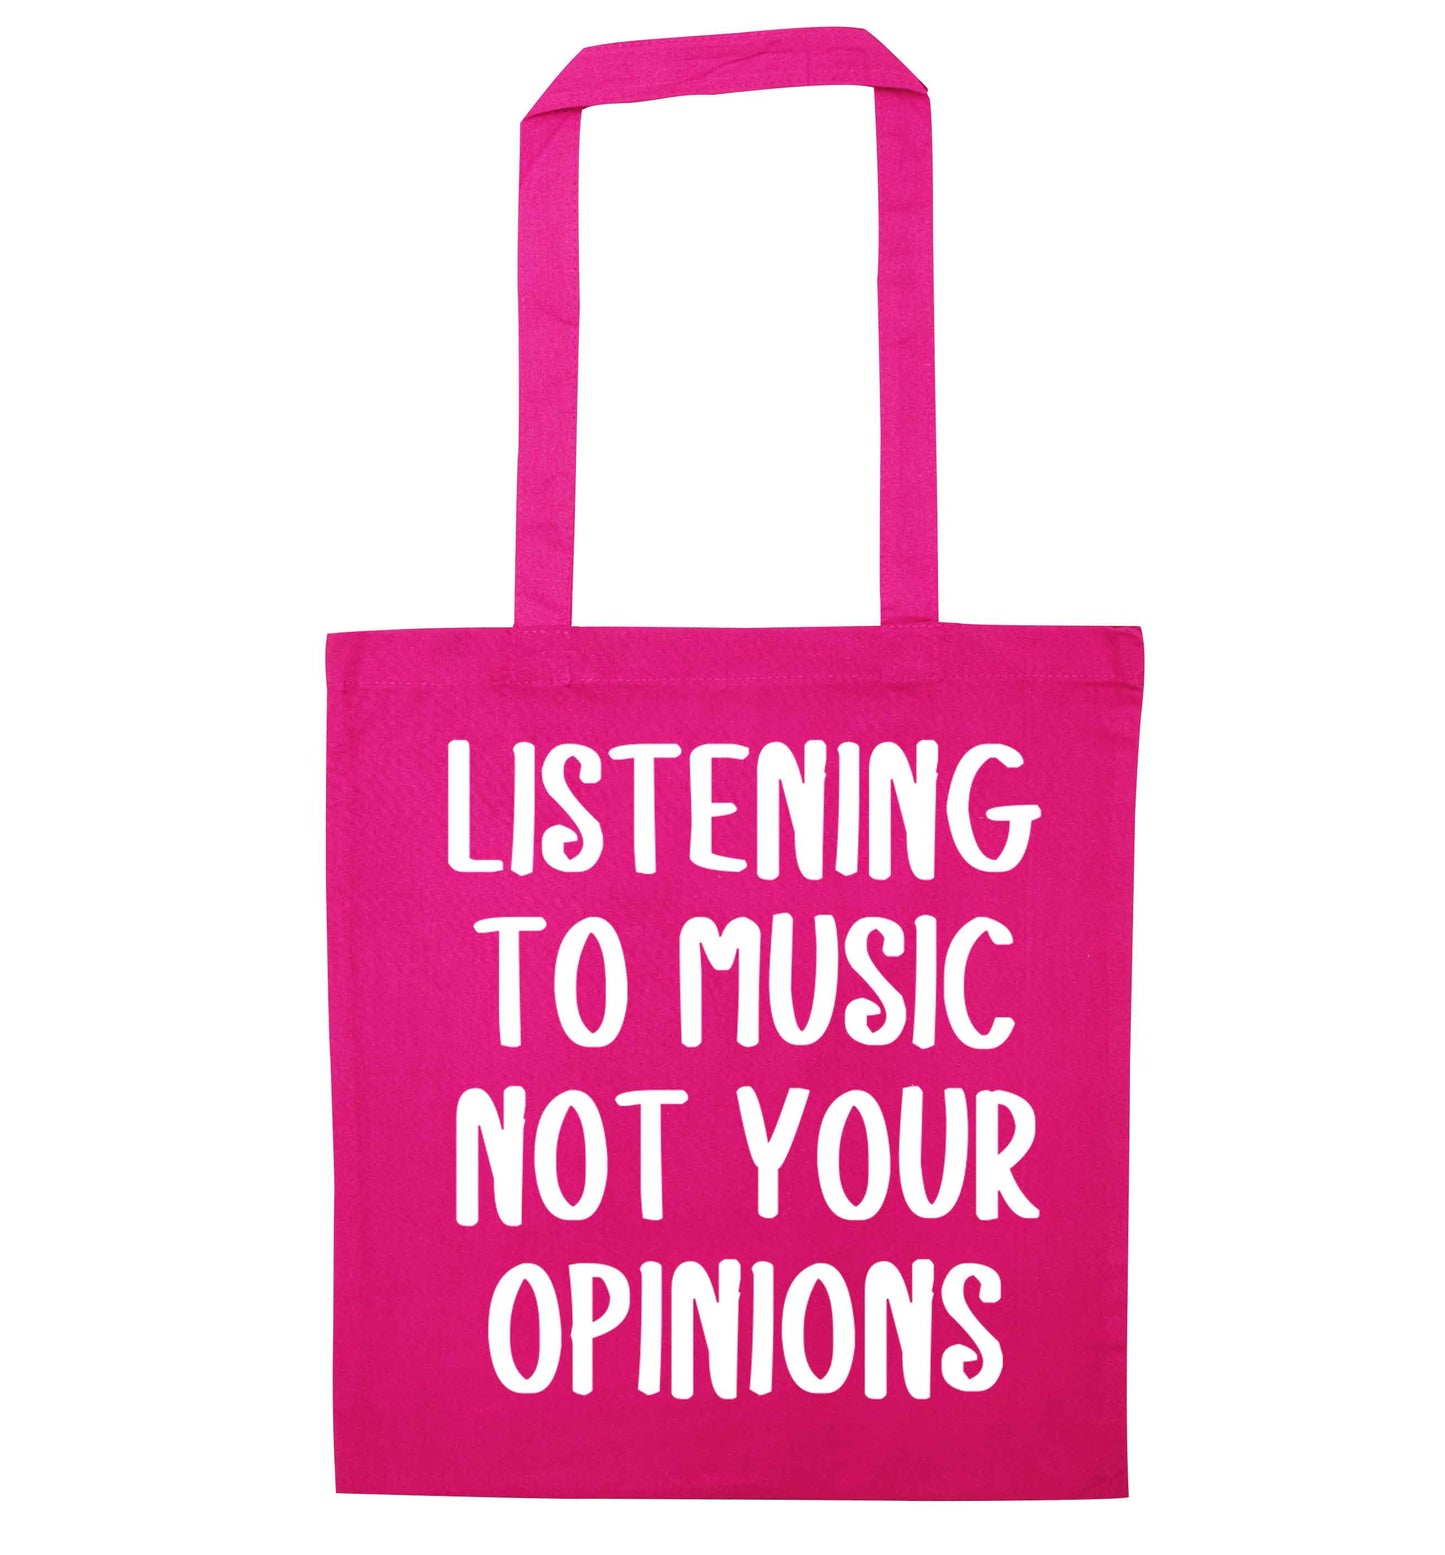 Listening to music not your opinions pink tote bag